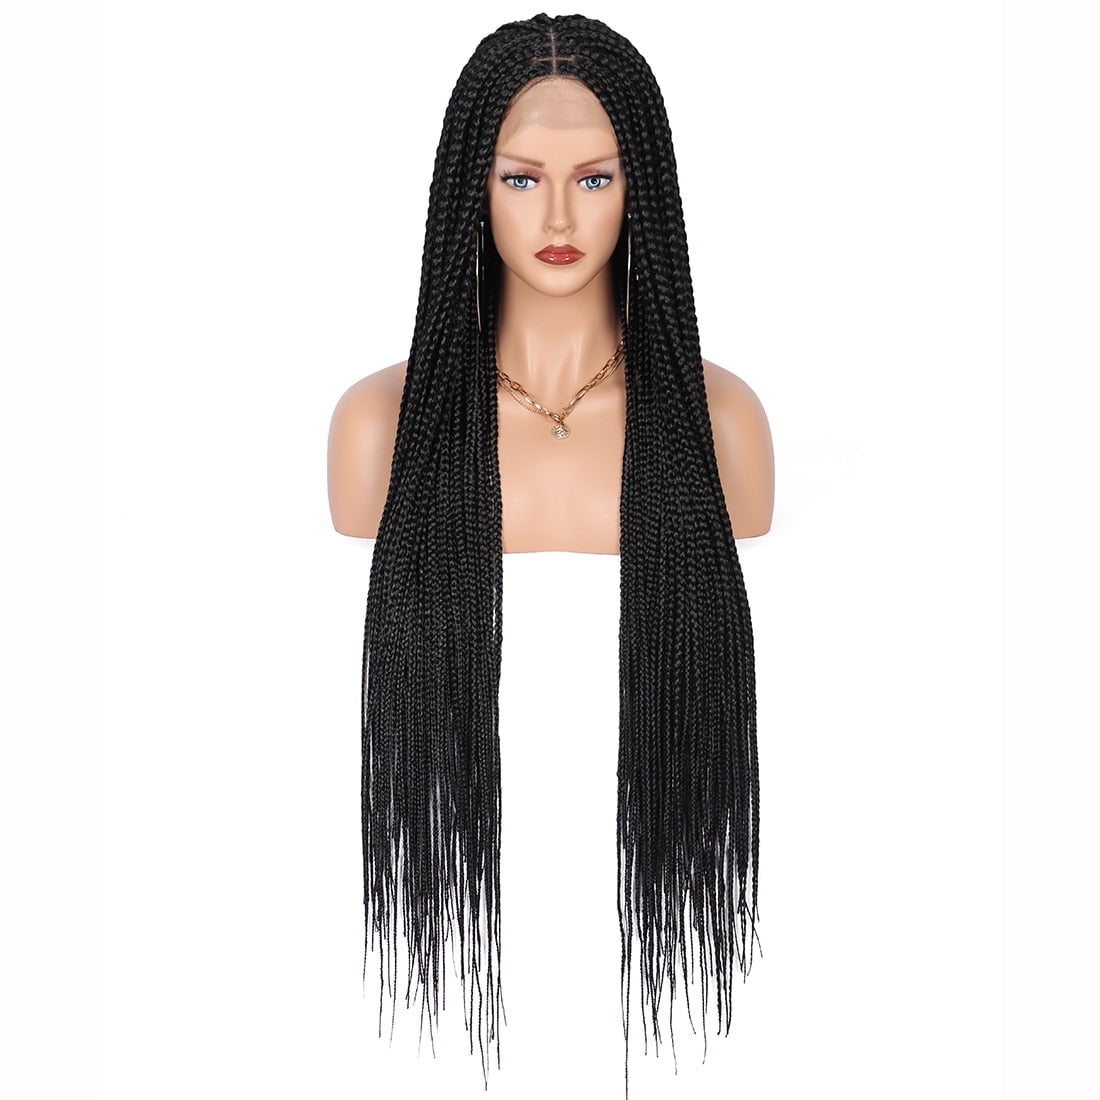  Braid Stand for Hair Braiding Women's Fashion Natural  Breathable Seamless Wig Hair Block Wig 35cm Wig Lace Front Straight :  Beauty & Personal Care